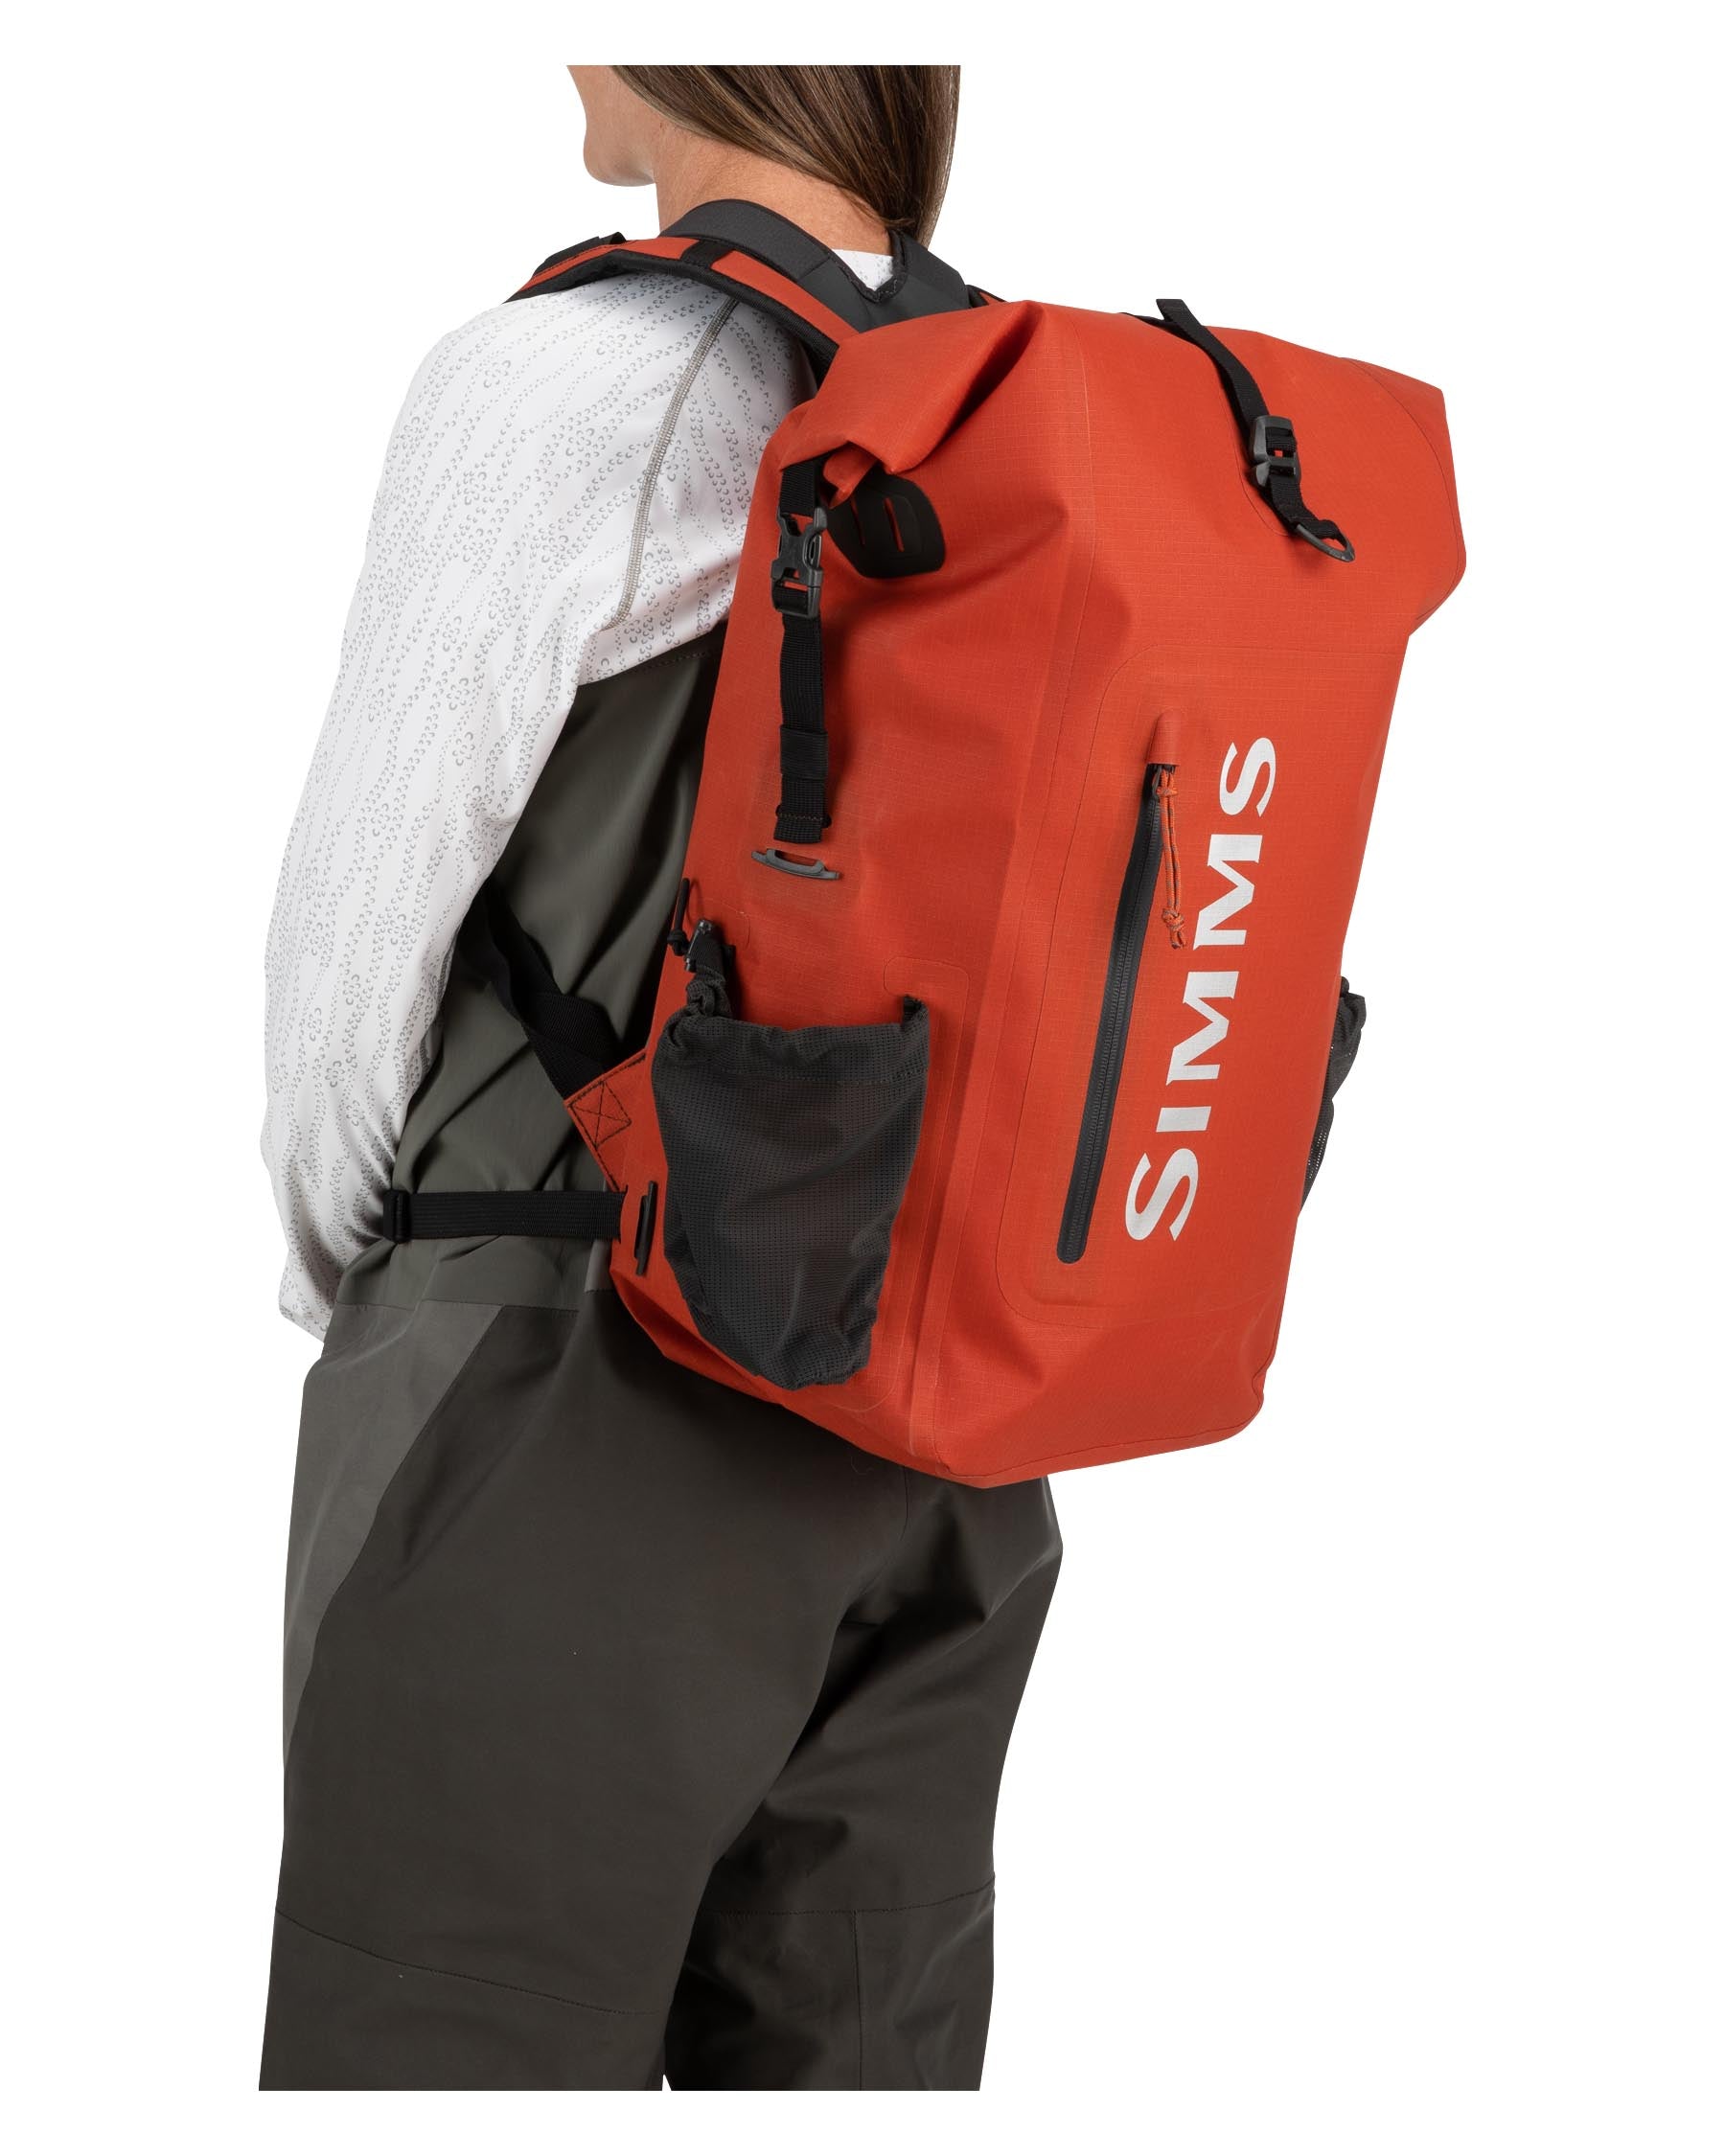 Dry Creek Rolltop Backpack | Simms Fishing Products